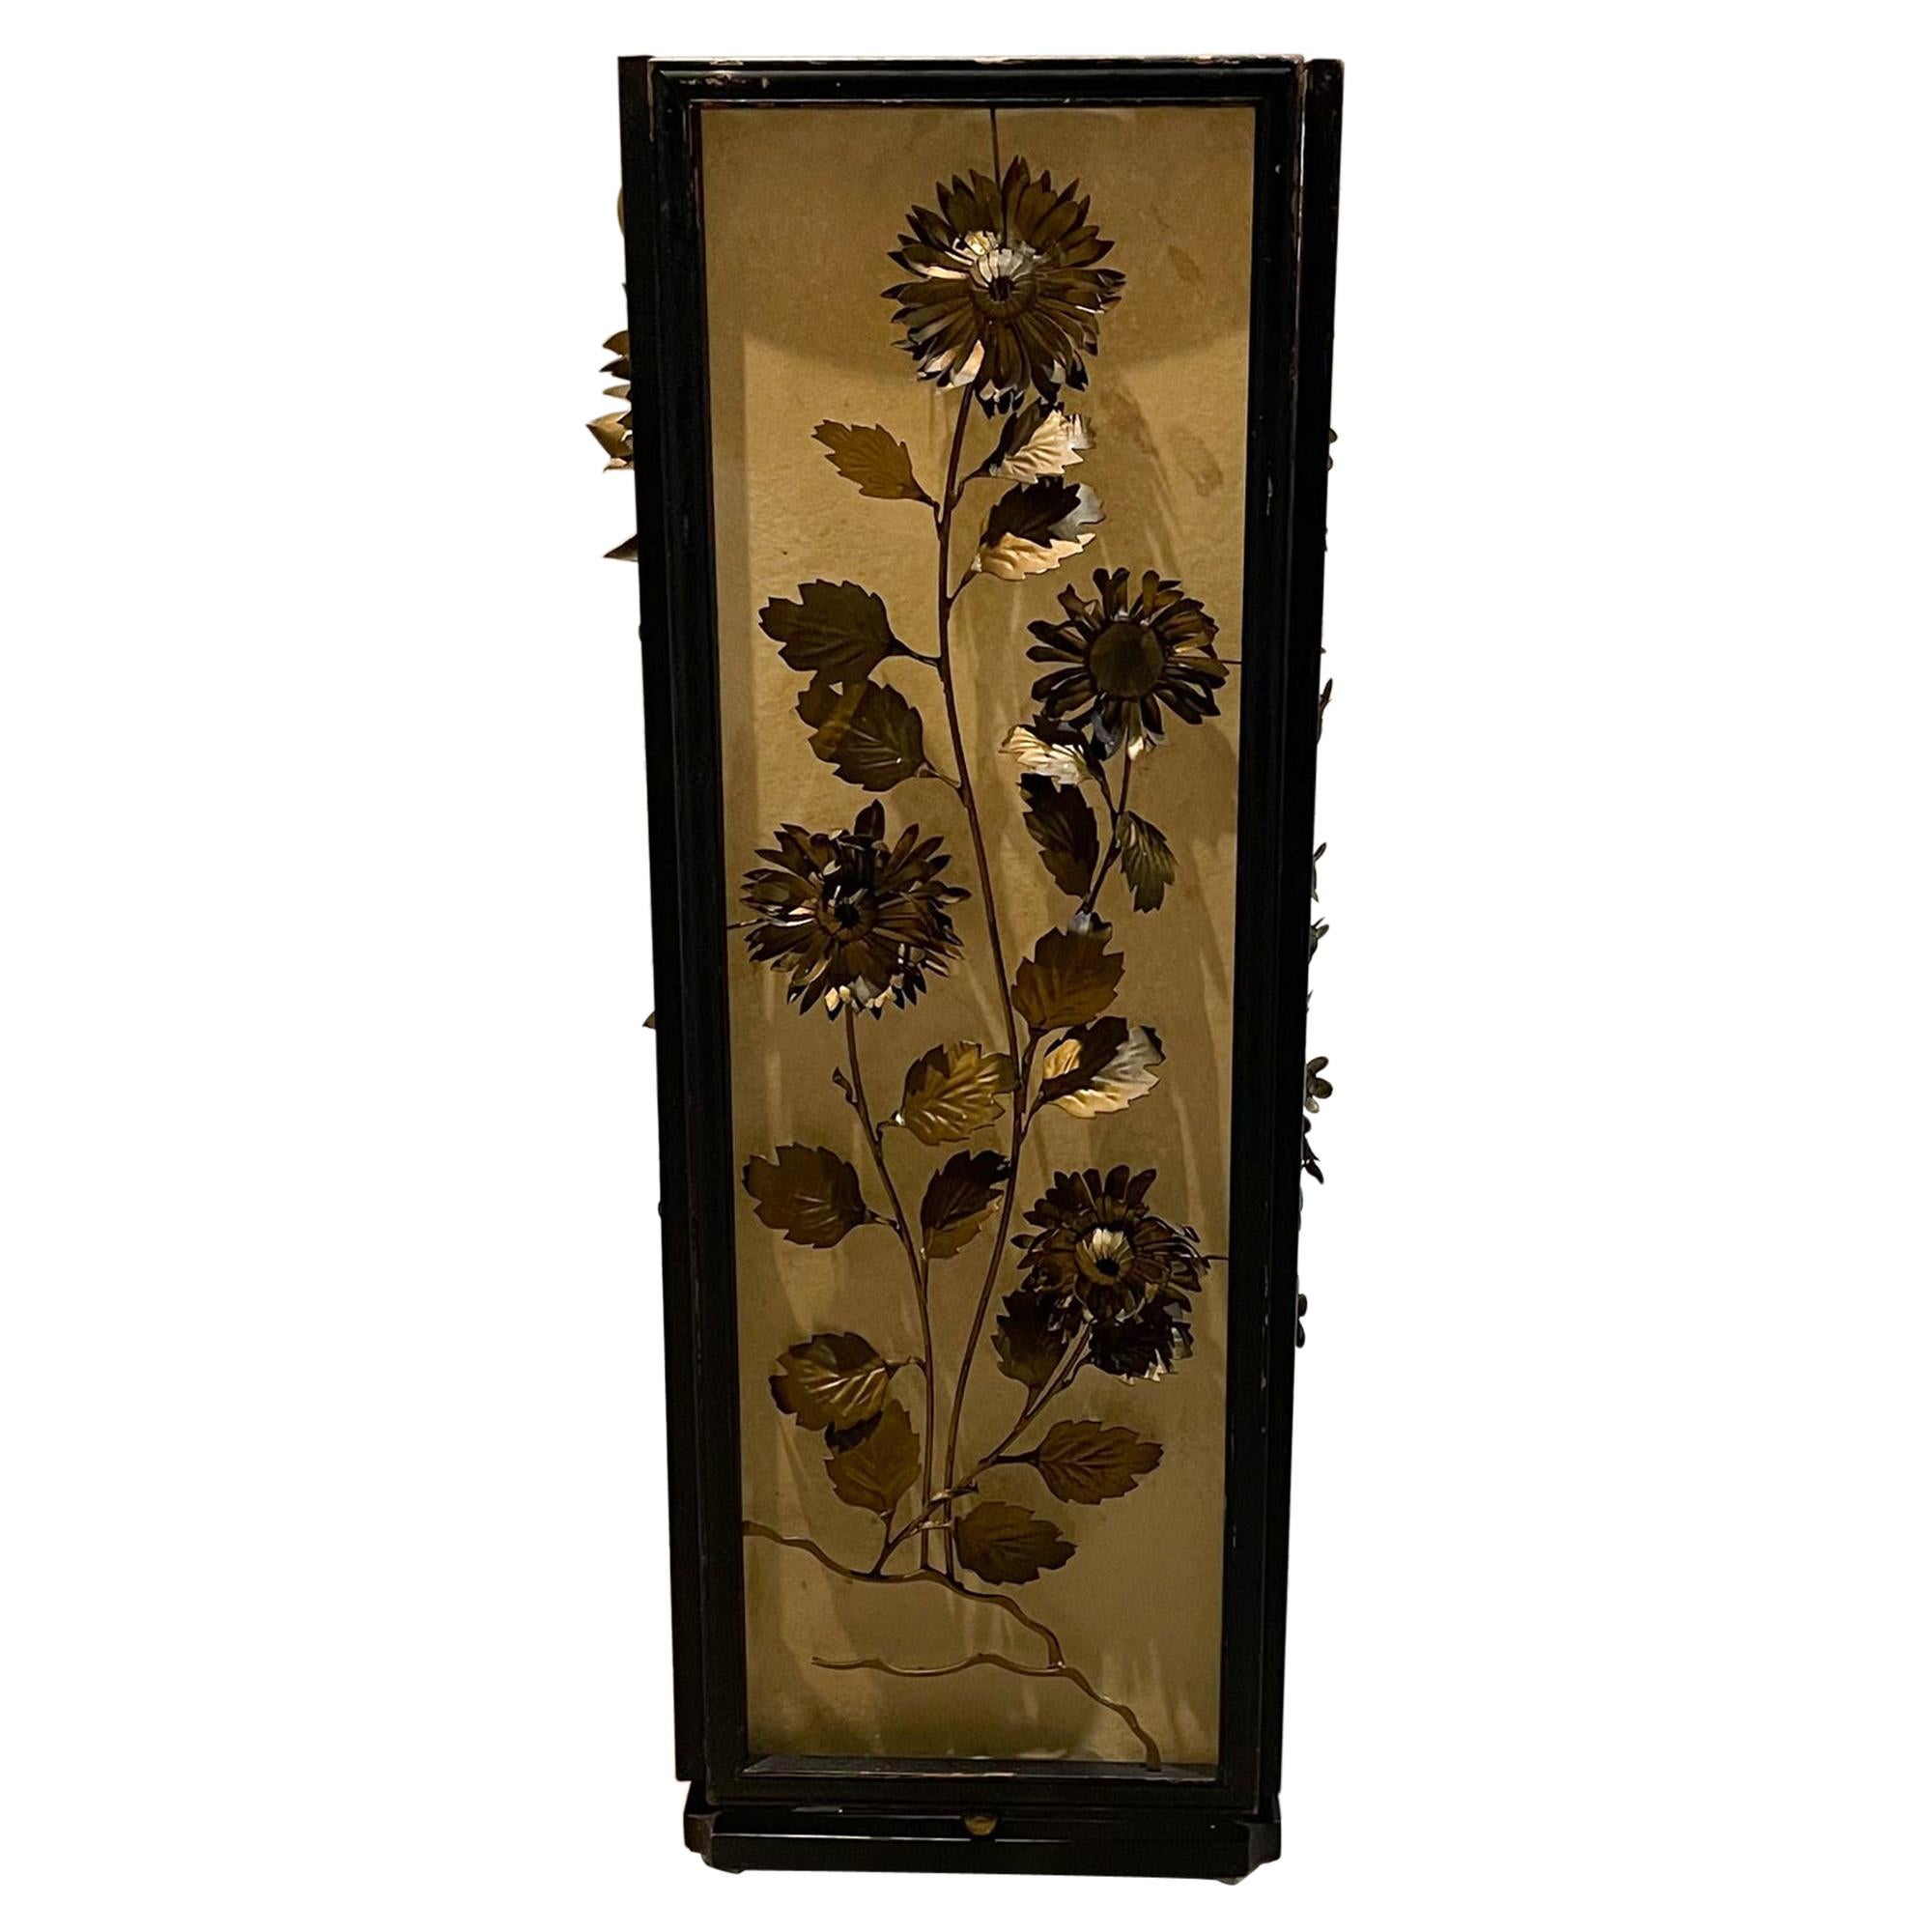 Exquisite Japanese Wood Lantern Table Lamp Unique Brass Flower Panels 1960s Asia For Sale